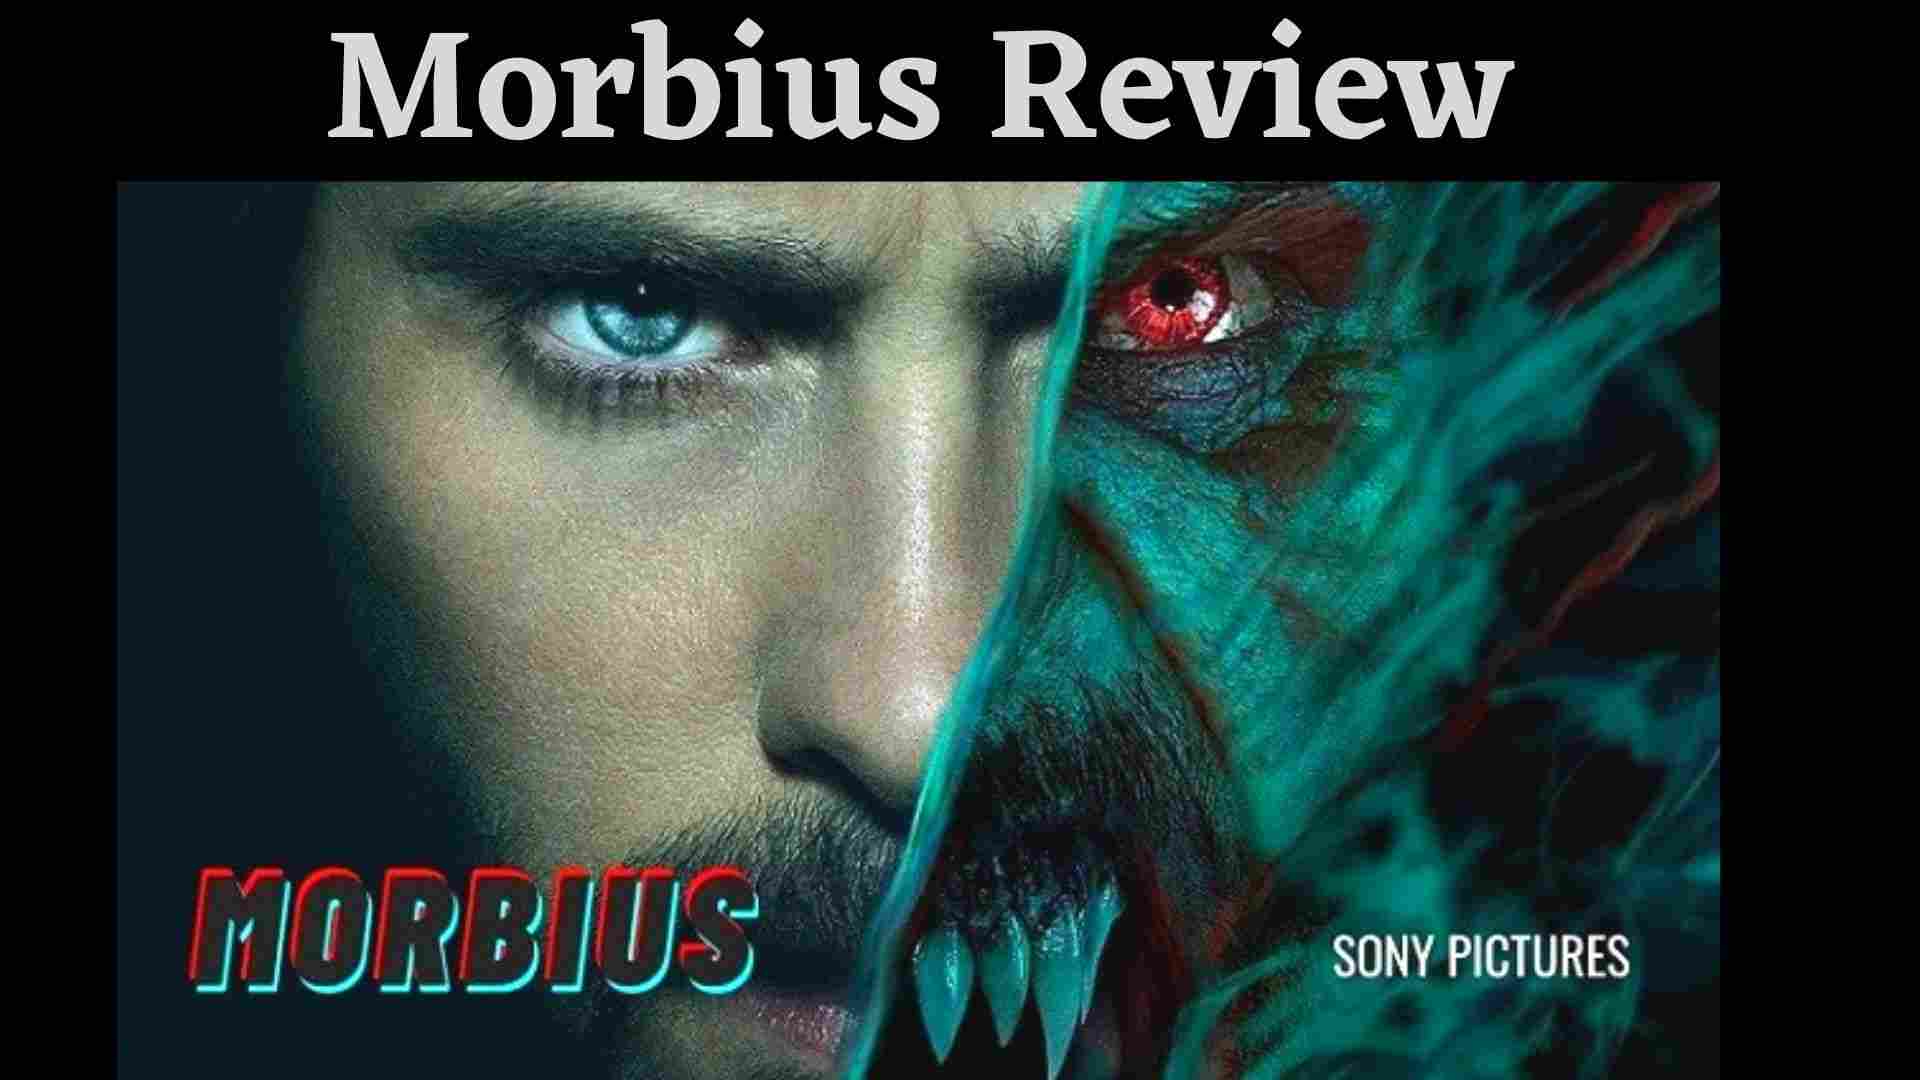 Morbius Review Wallpaper and images